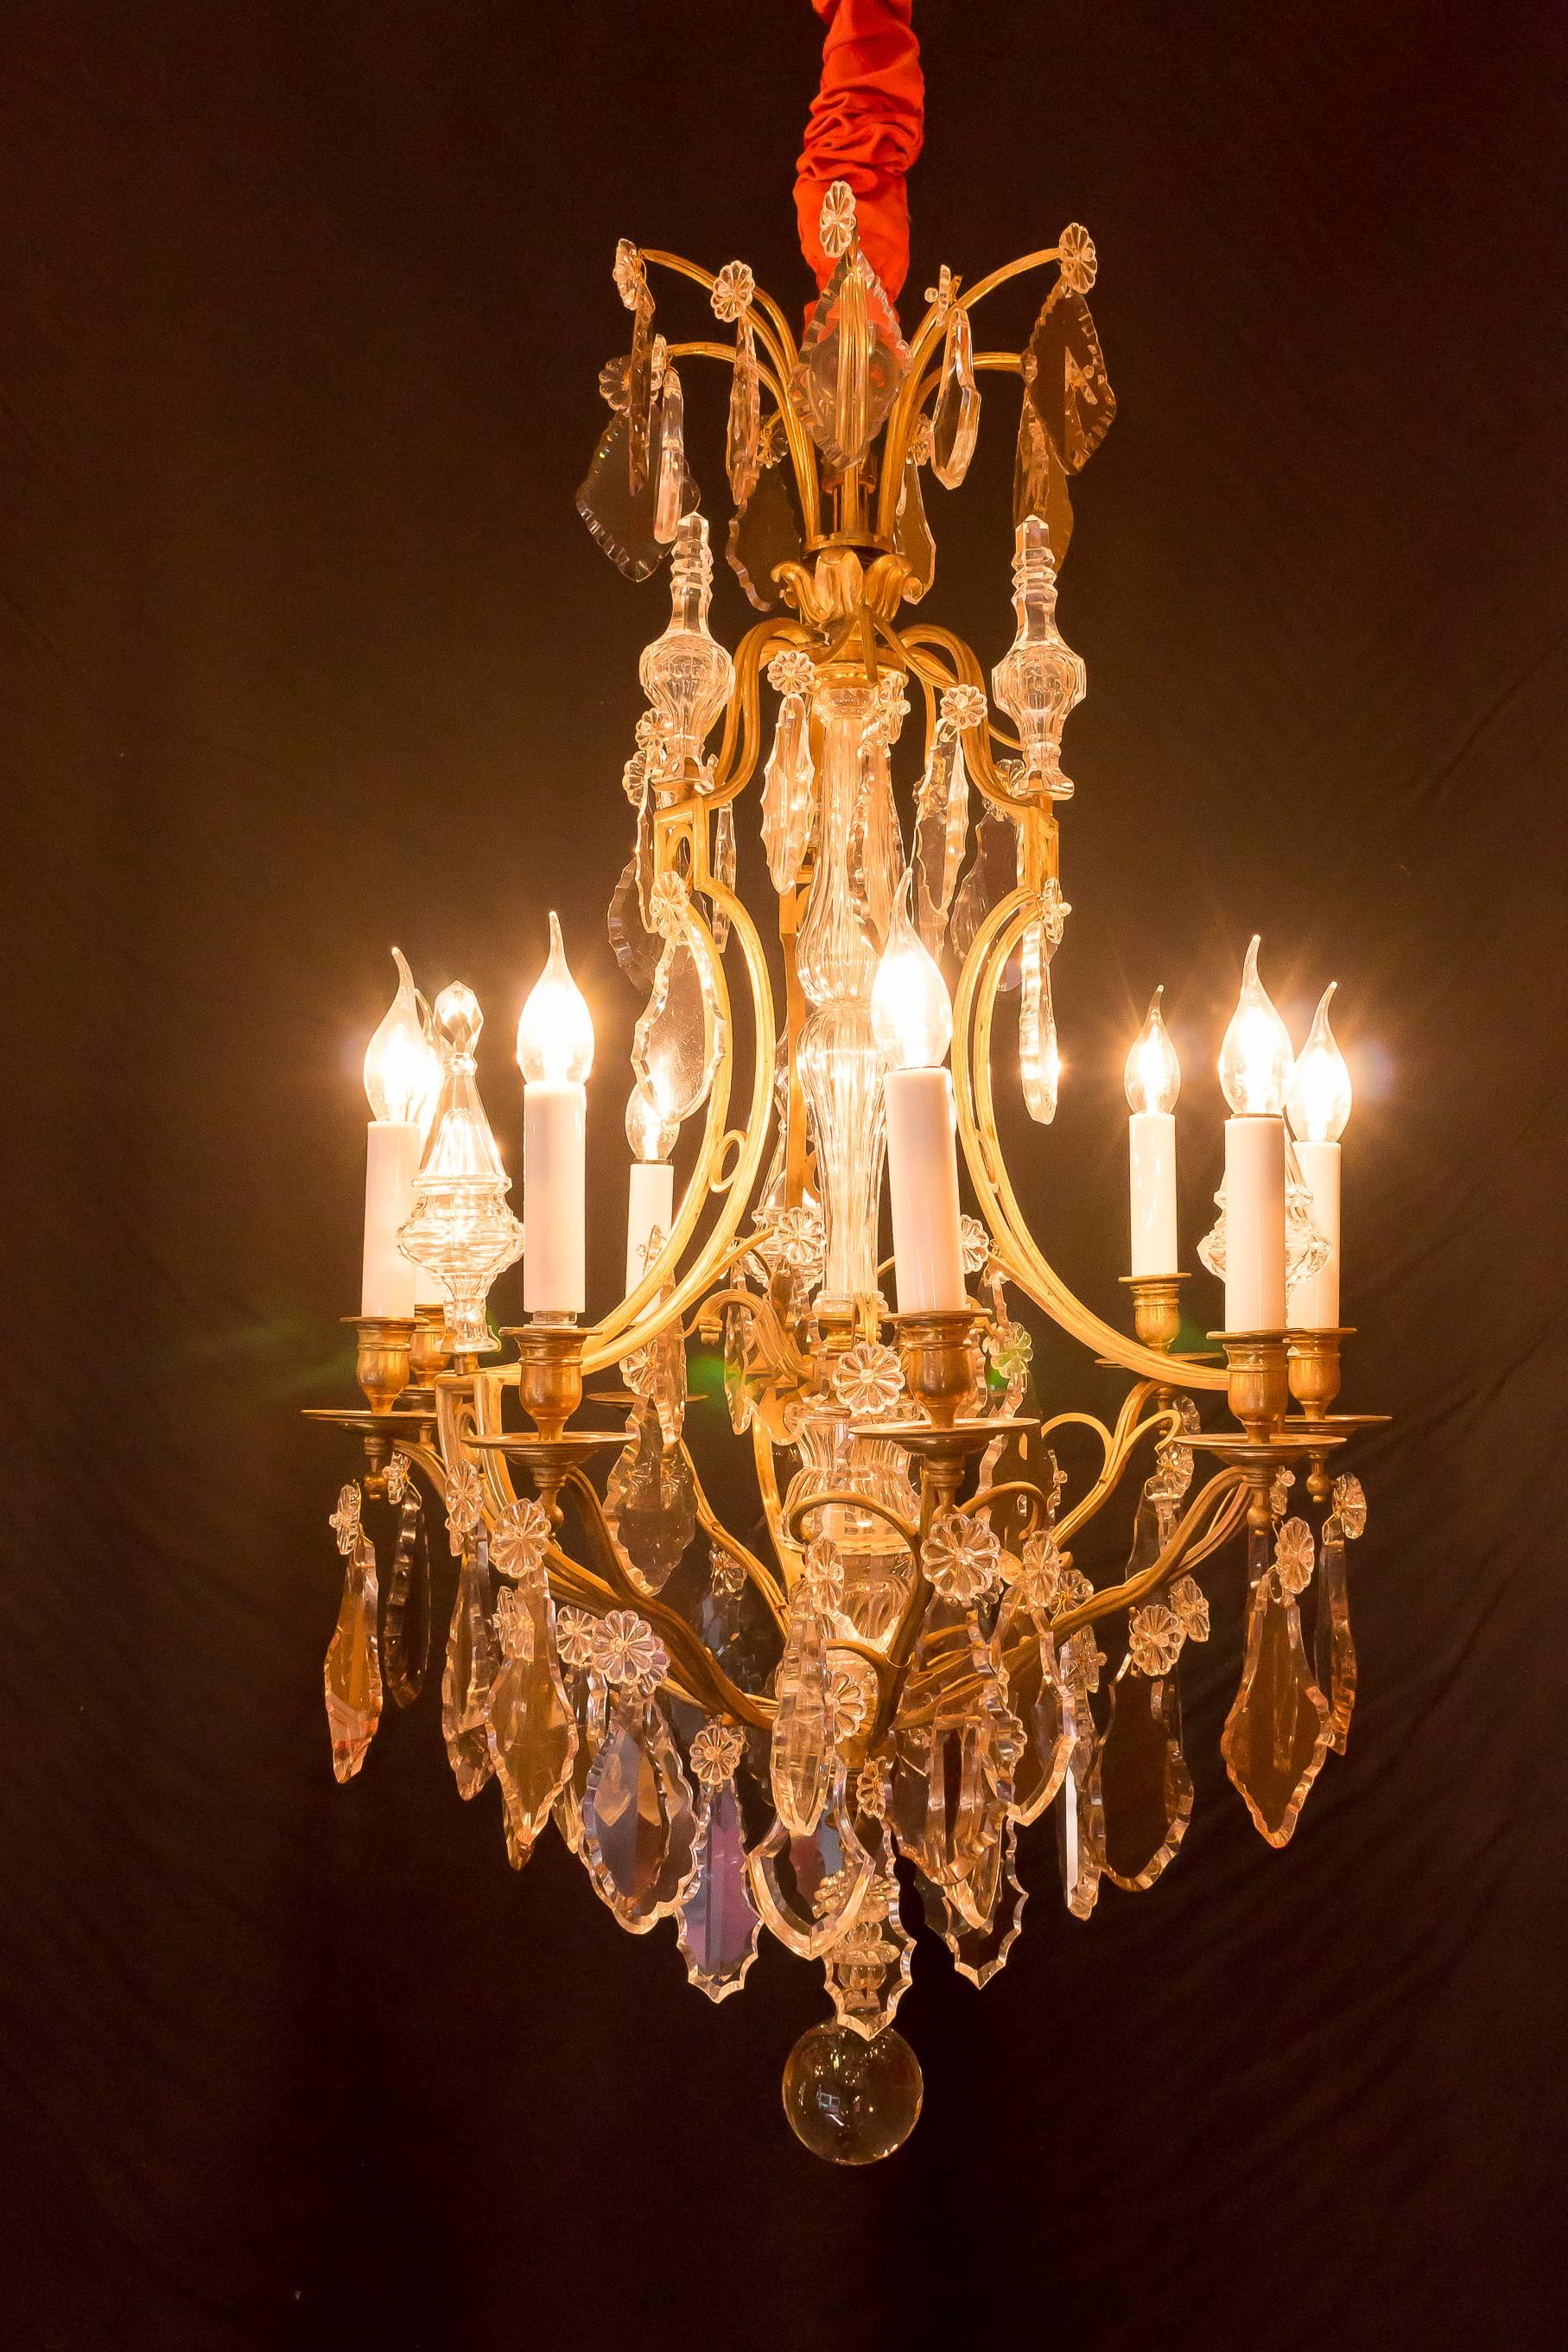 Gorgeous original ormolu and crystal form cage chandelier called “Oeil de Boeuf” in the classical Louis XV style. It is composed of nine perimeter arm lights, and a beautiful amazing fine quality hand-cut crystal decoration with six crystal daggers